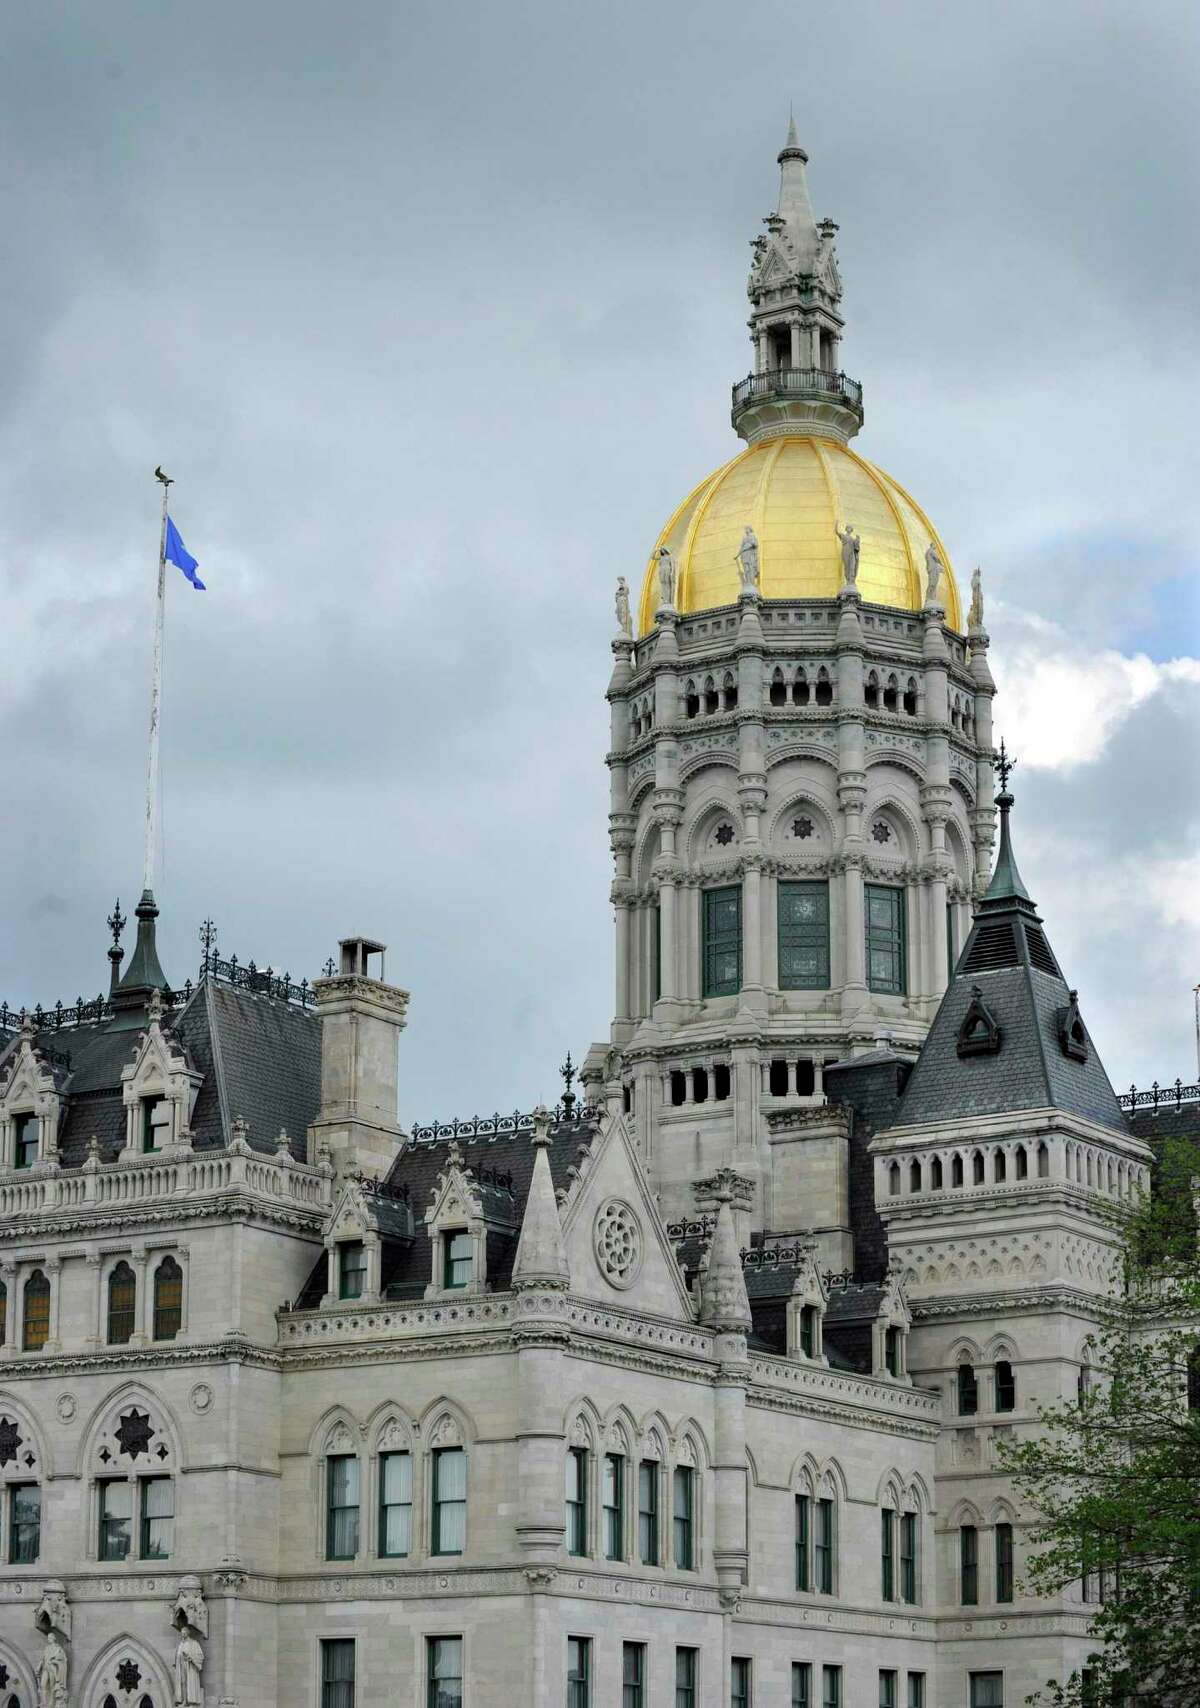 The Connecticut State Capitol building in Hartford.